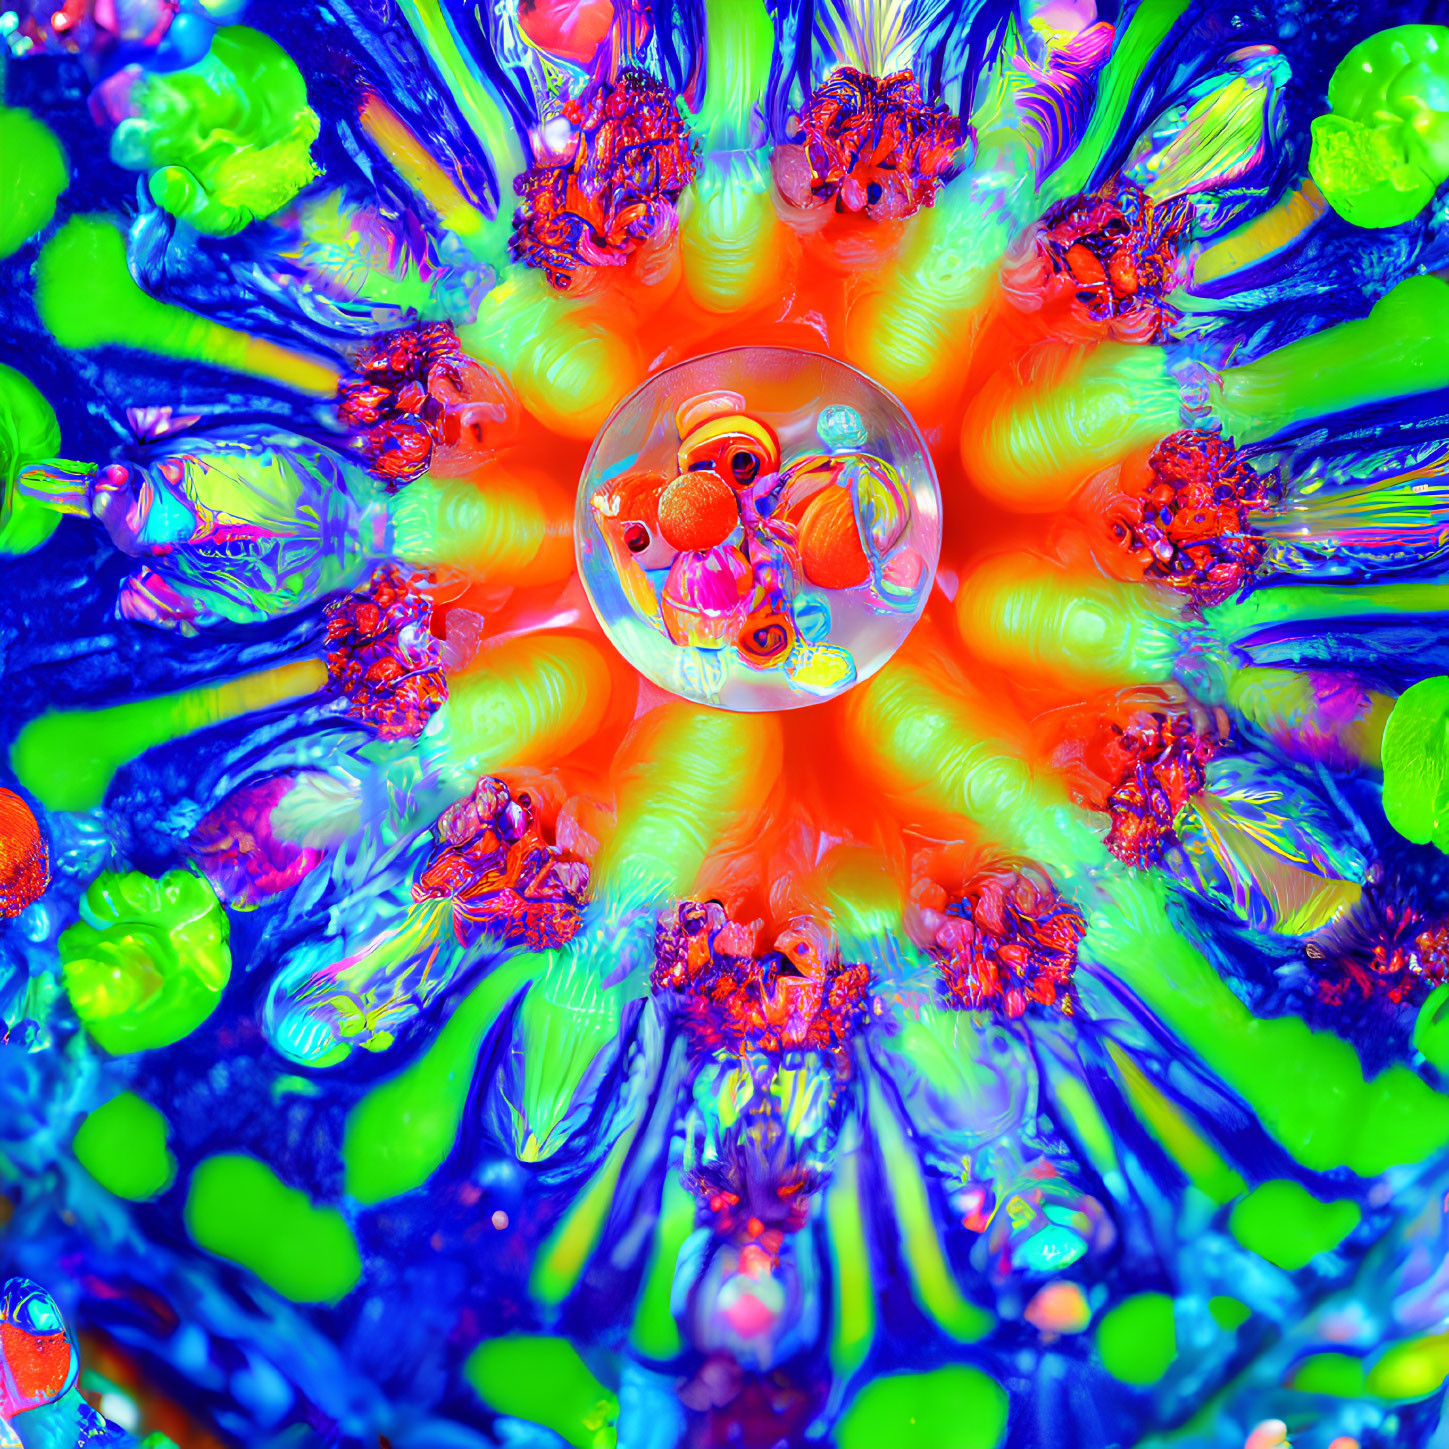 Colorful Psychedelic Close-Up of Central Bubble and Intricate Patterns